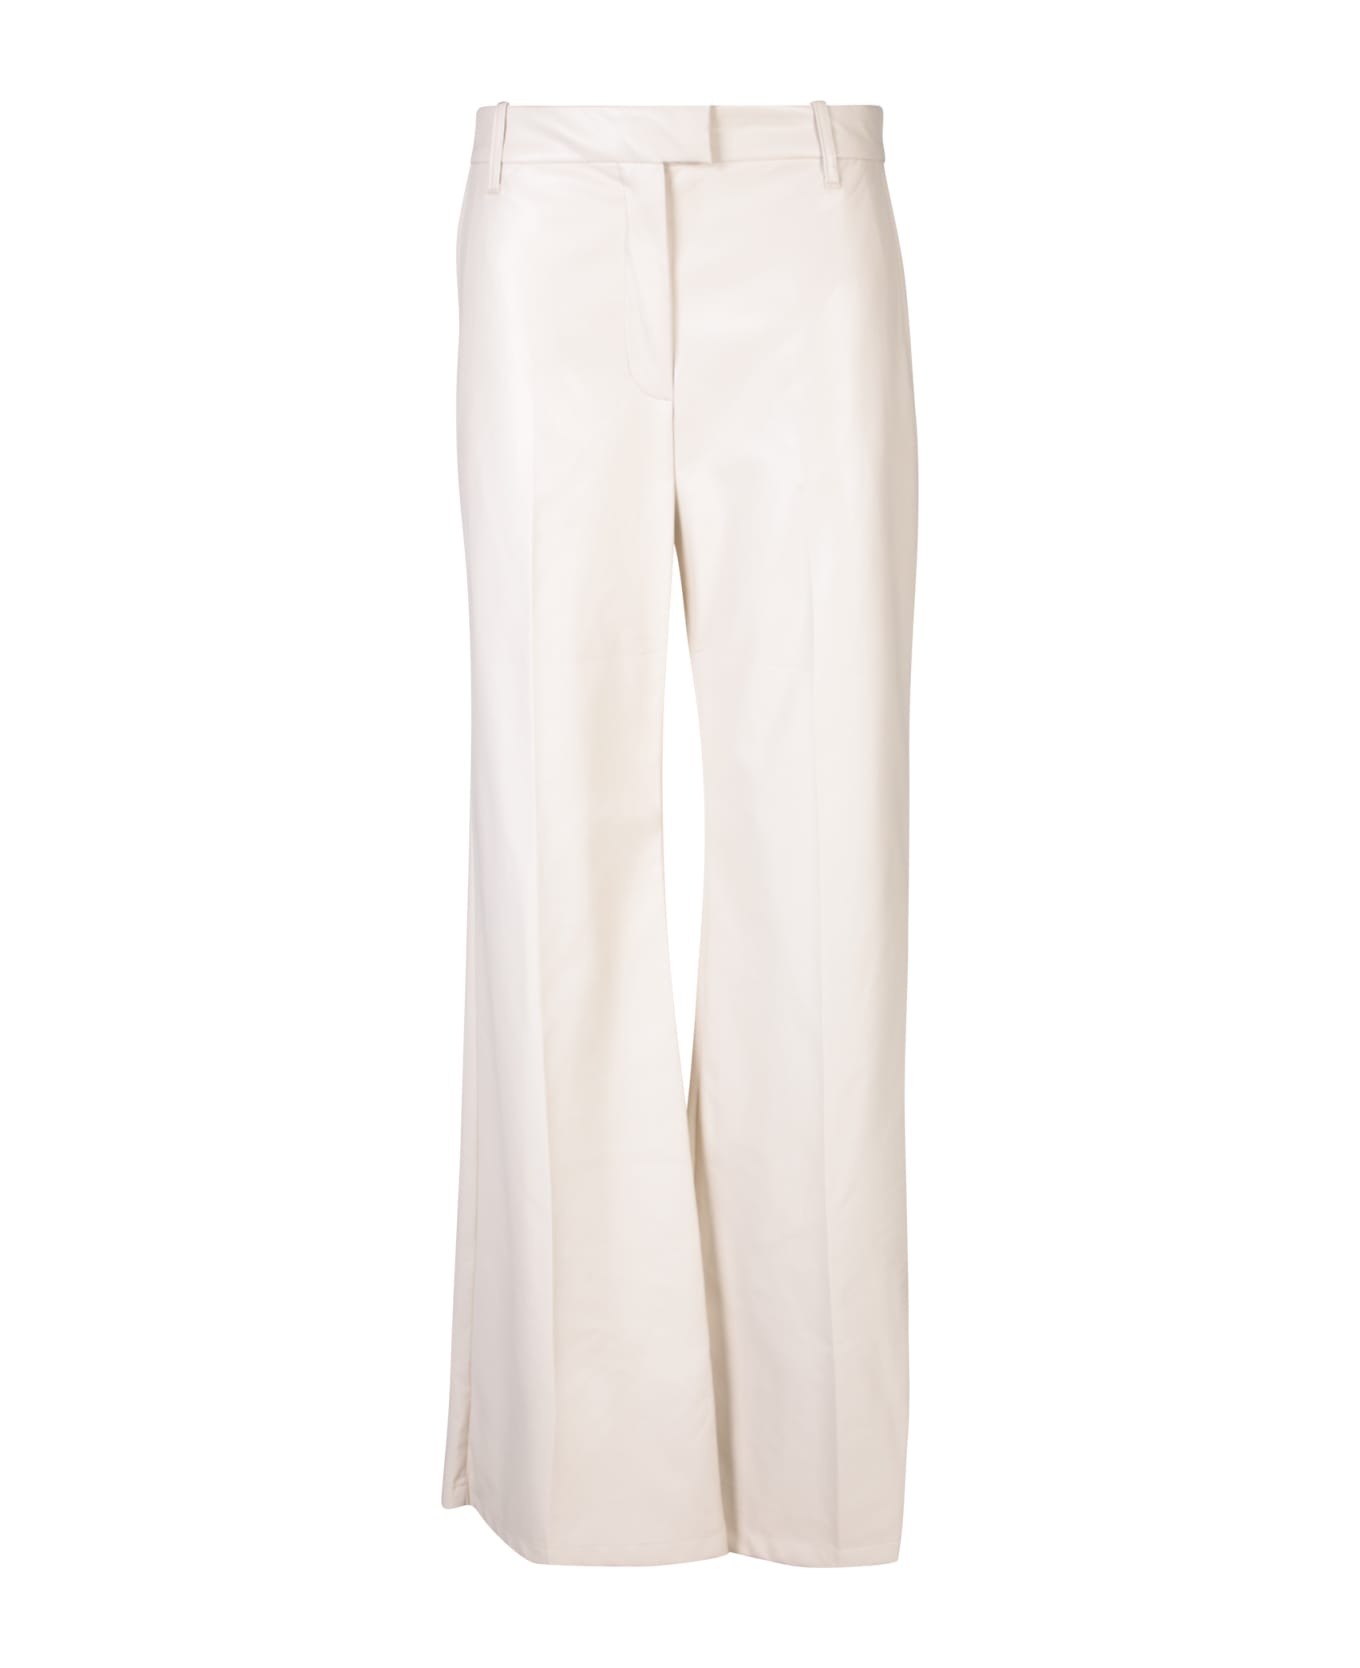 STAND STUDIO Ivory Faux Leather Flare Trousers - White ボトムス